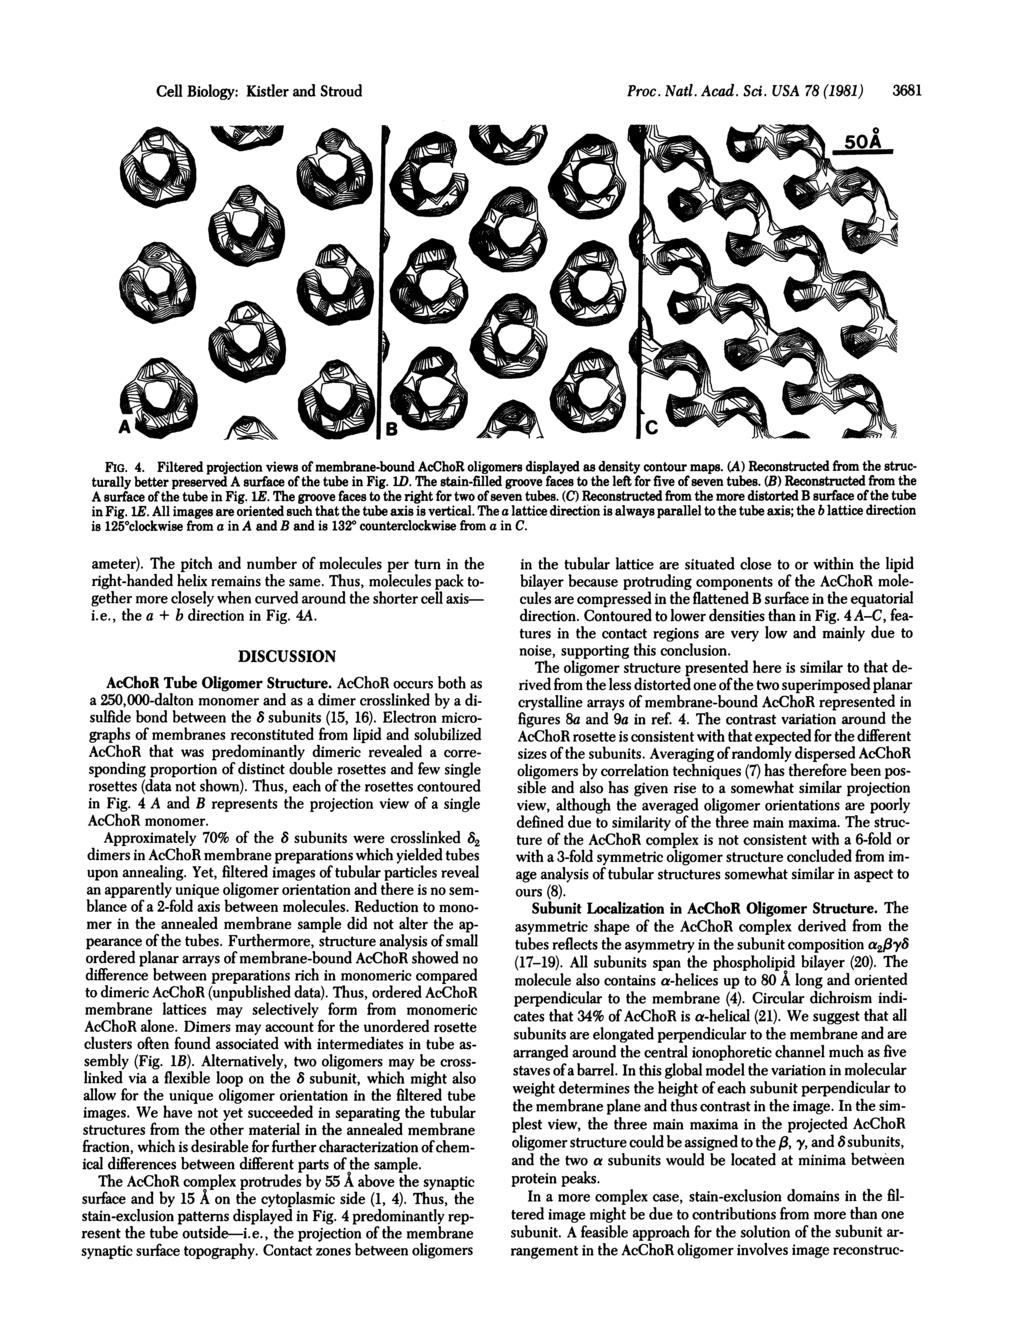 Cell Biology: Kistler and Stroud Proc. Natl. Acad. Sci. USA 78 (1981) 3681 FIG. 4. Filtered projection views of membrane-bound AcChoR oligomers displayed as density contour maps.